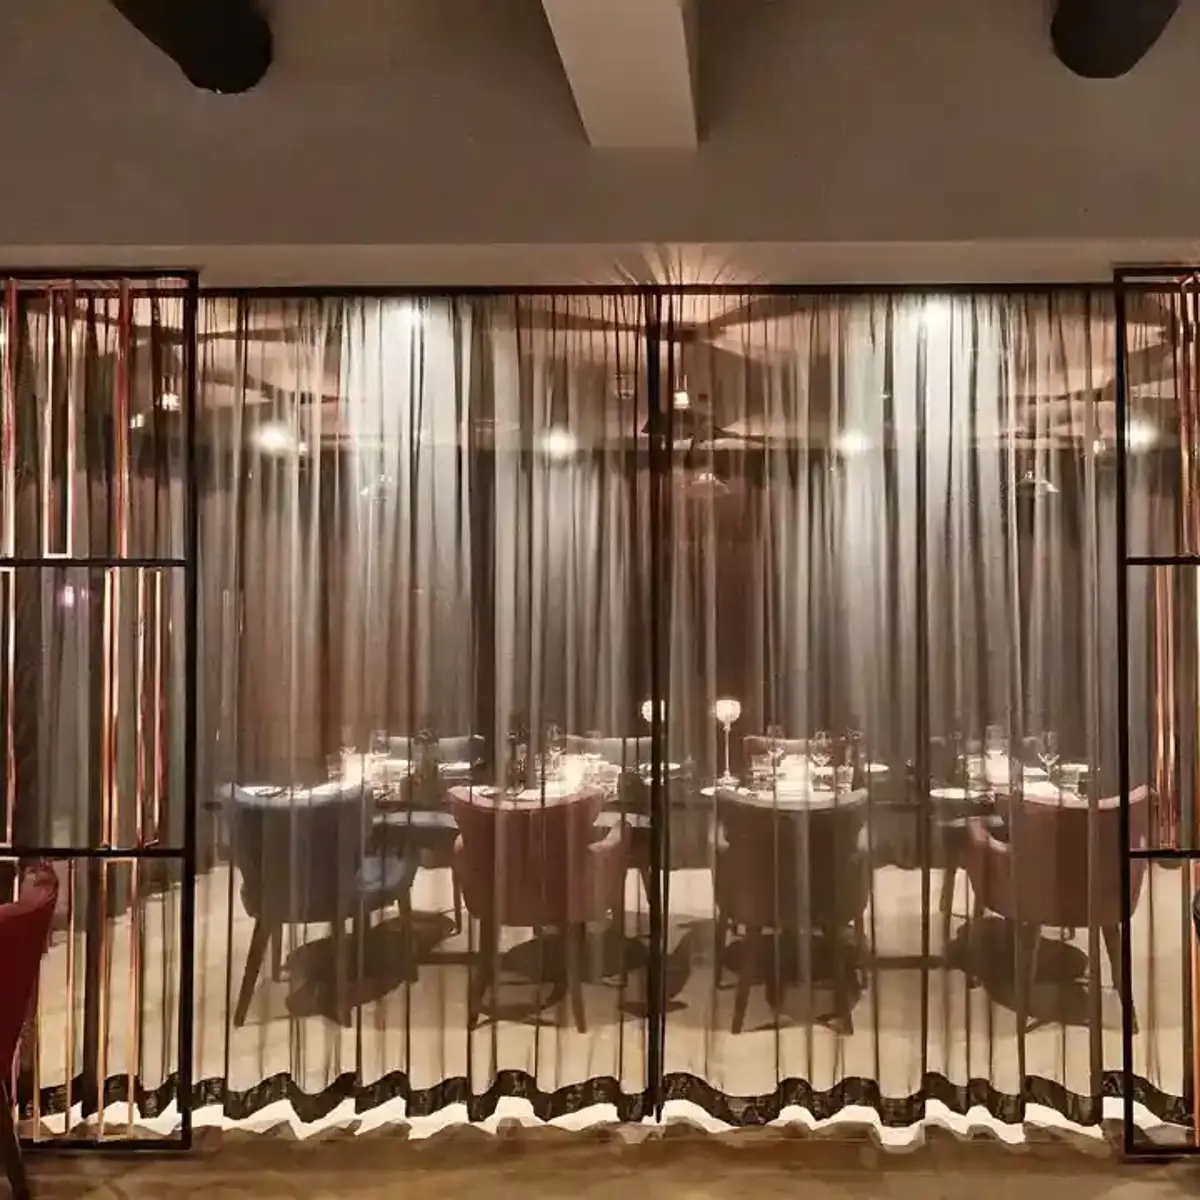 A restaurant featuring a spacious room adorned with black tables and fabric chairs.